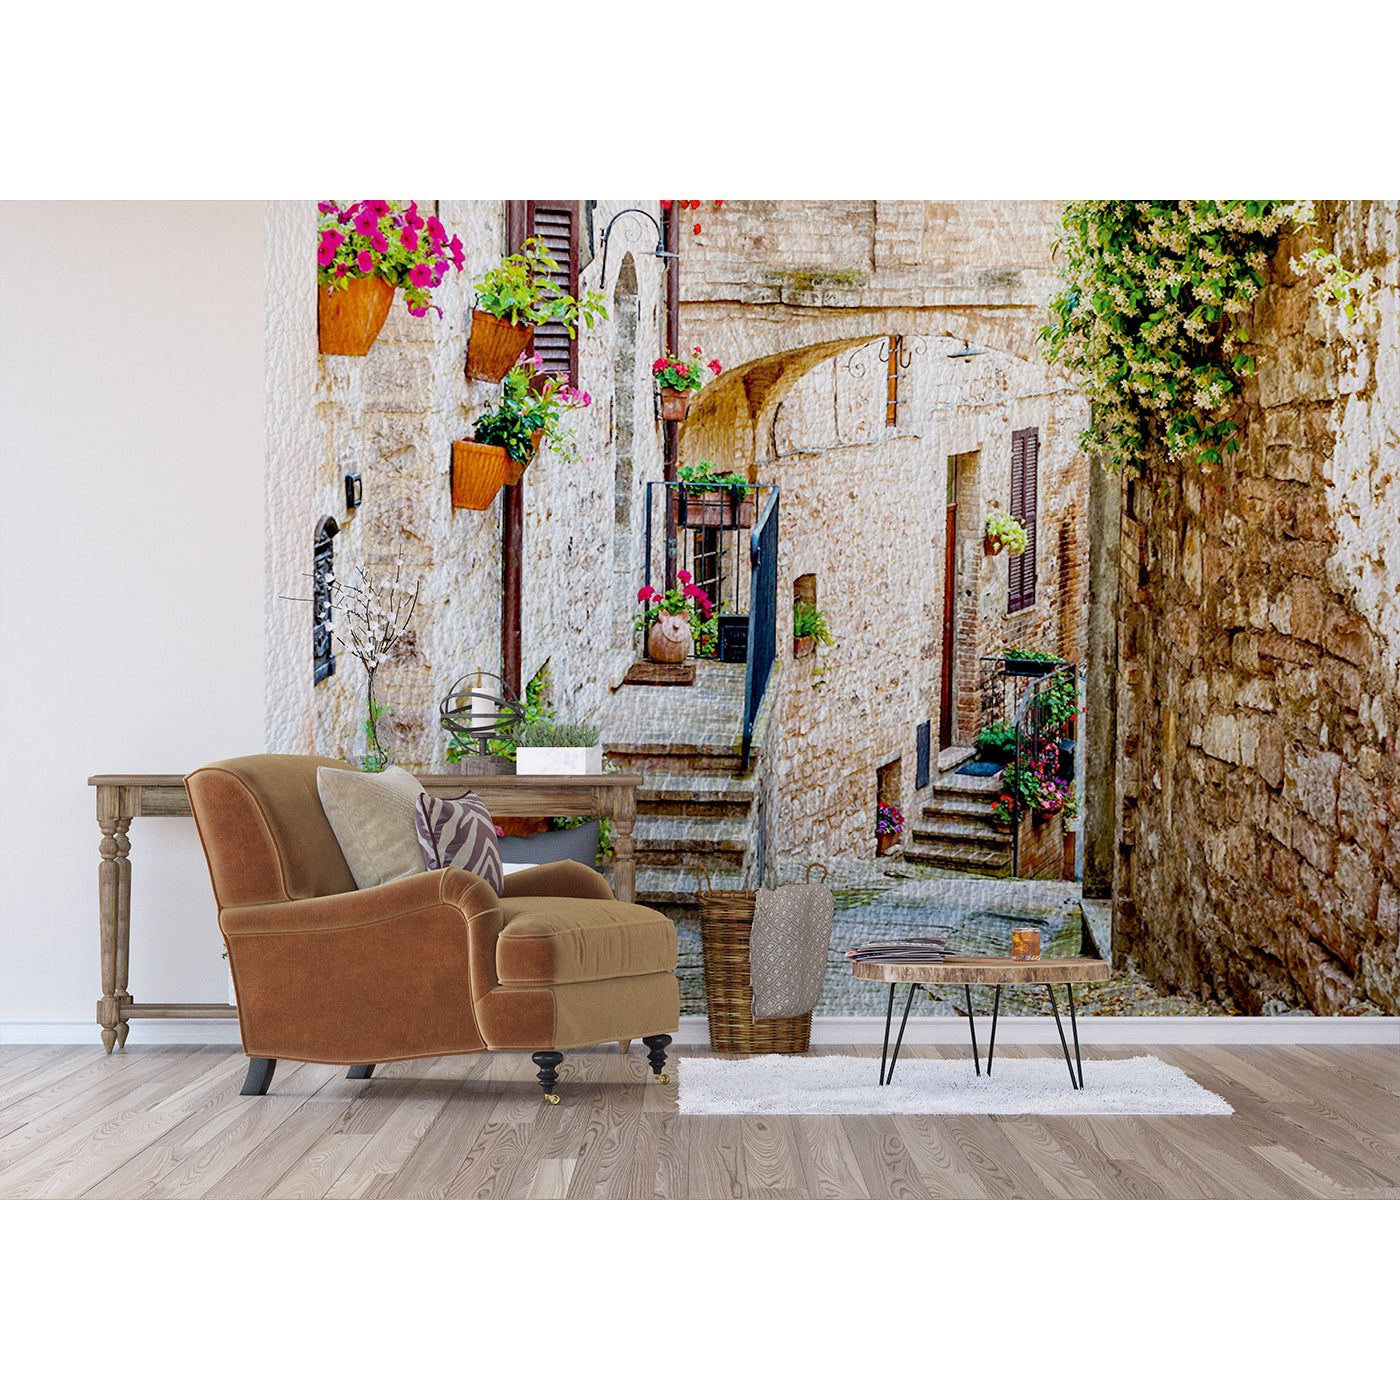 Vintage Brick City Charm: Floral Walls & Stairs Wall Mural